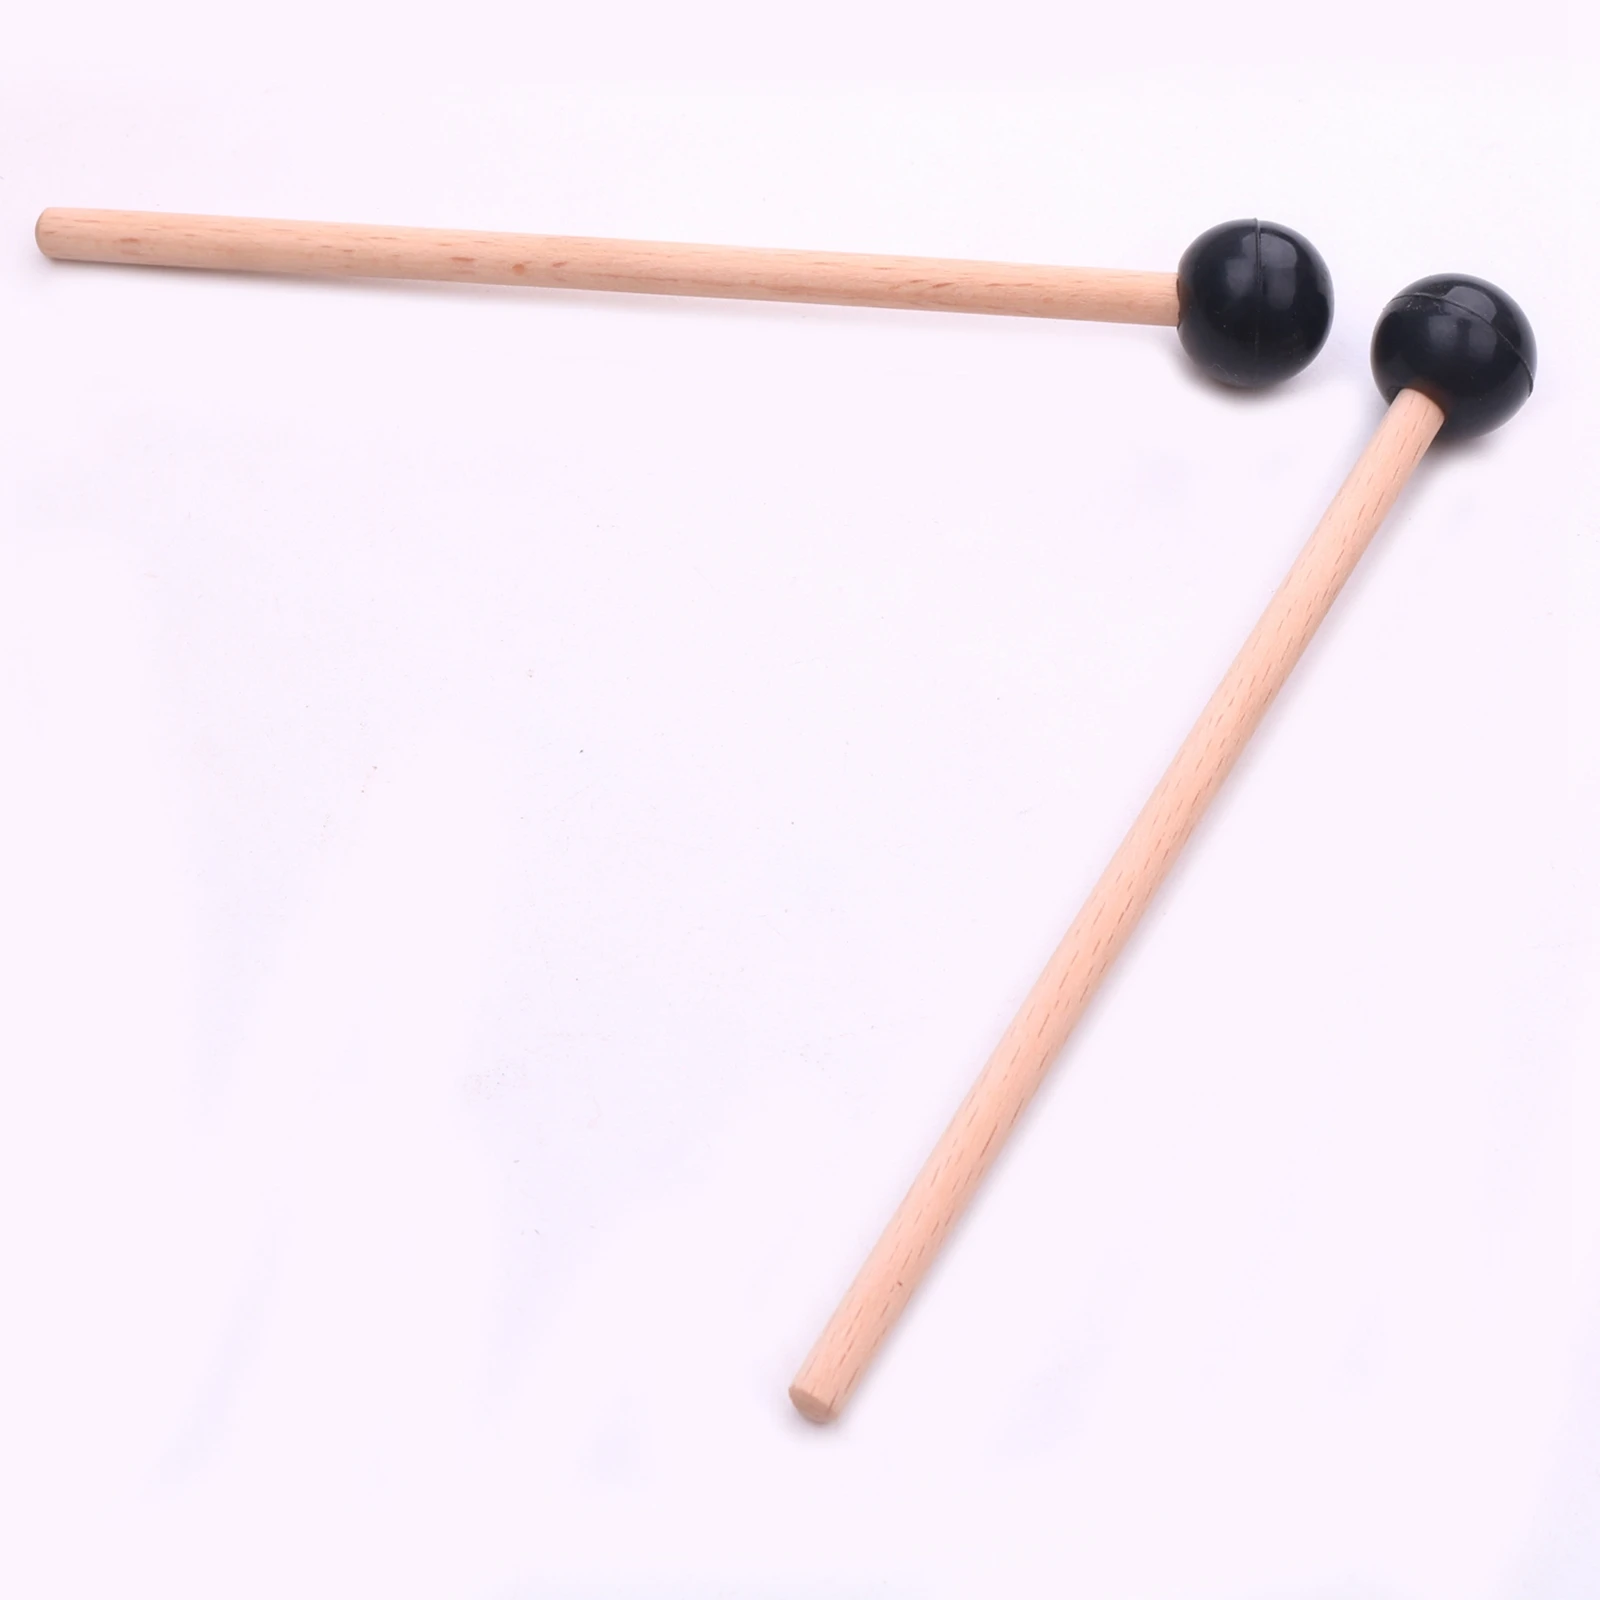 Professional Wooden Drumstick Percussion Rubber Head Xylophone Marimba Mallets with Wood Handle Instrument Accessories 5.71inch